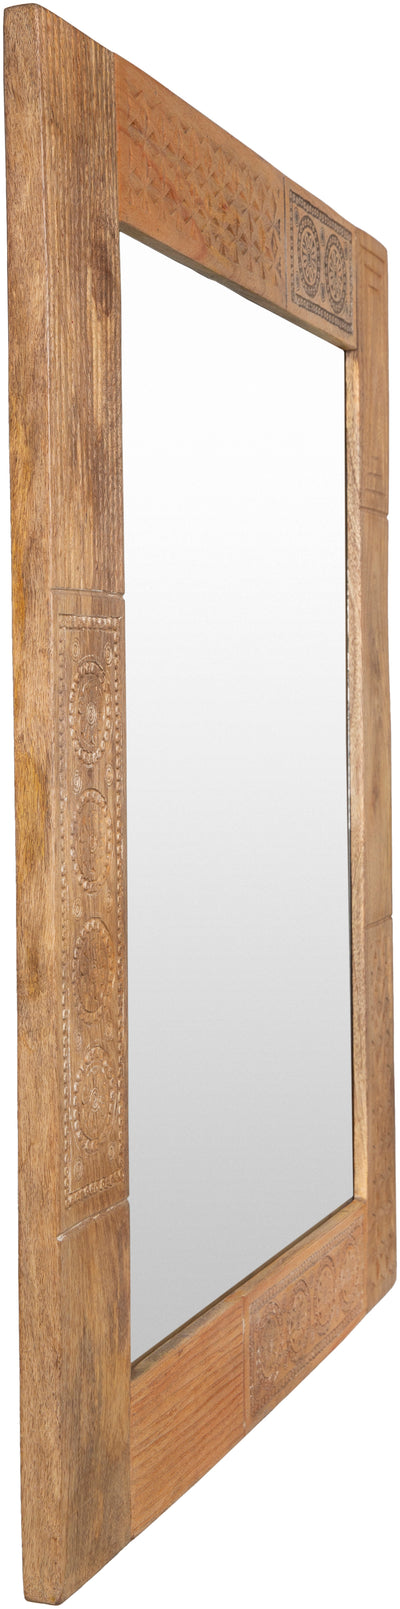 product image for Dilwara DLW-001 Rectangular Mirror in Natural by Surya 33